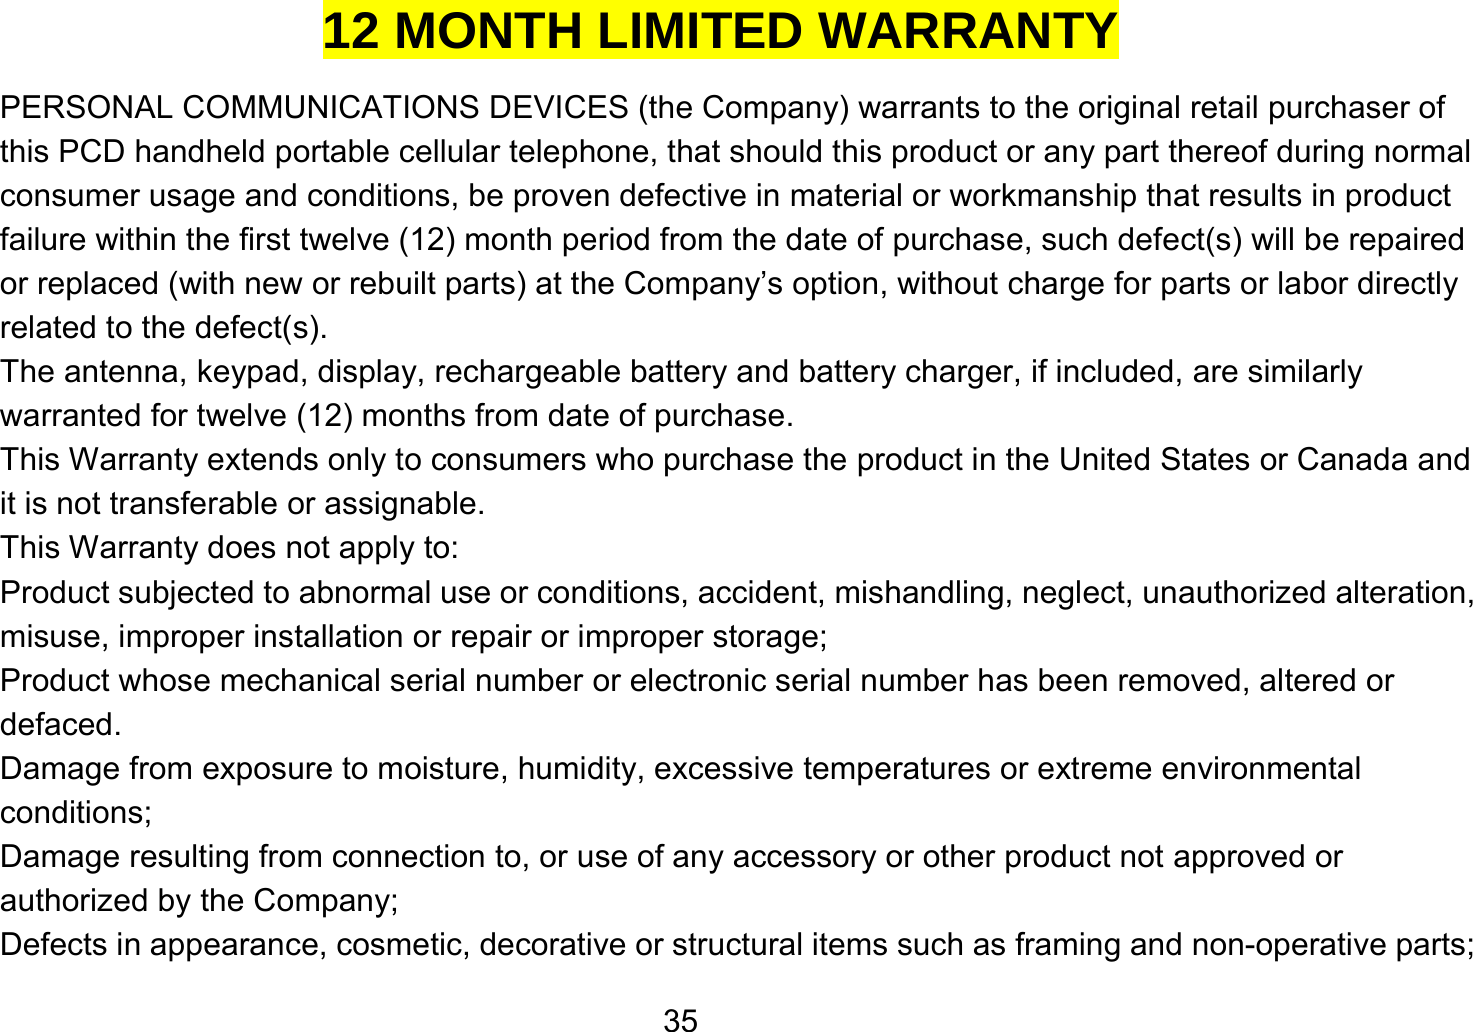   3512 MONTH LIMITED WARRANTY PERSONAL COMMUNICATIONS DEVICES (the Company) warrants to the original retail purchaser of this PCD handheld portable cellular telephone, that should this product or any part thereof during normal consumer usage and conditions, be proven defective in material or workmanship that results in product failure within the first twelve (12) month period from the date of purchase, such defect(s) will be repaired or replaced (with new or rebuilt parts) at the Company’s option, without charge for parts or labor directly related to the defect(s). The antenna, keypad, display, rechargeable battery and battery charger, if included, are similarly warranted for twelve (12) months from date of purchase.     This Warranty extends only to consumers who purchase the product in the United States or Canada and it is not transferable or assignable. This Warranty does not apply to: Product subjected to abnormal use or conditions, accident, mishandling, neglect, unauthorized alteration, misuse, improper installation or repair or improper storage; Product whose mechanical serial number or electronic serial number has been removed, altered or defaced. Damage from exposure to moisture, humidity, excessive temperatures or extreme environmental conditions; Damage resulting from connection to, or use of any accessory or other product not approved or authorized by the Company; Defects in appearance, cosmetic, decorative or structural items such as framing and non-operative parts; 